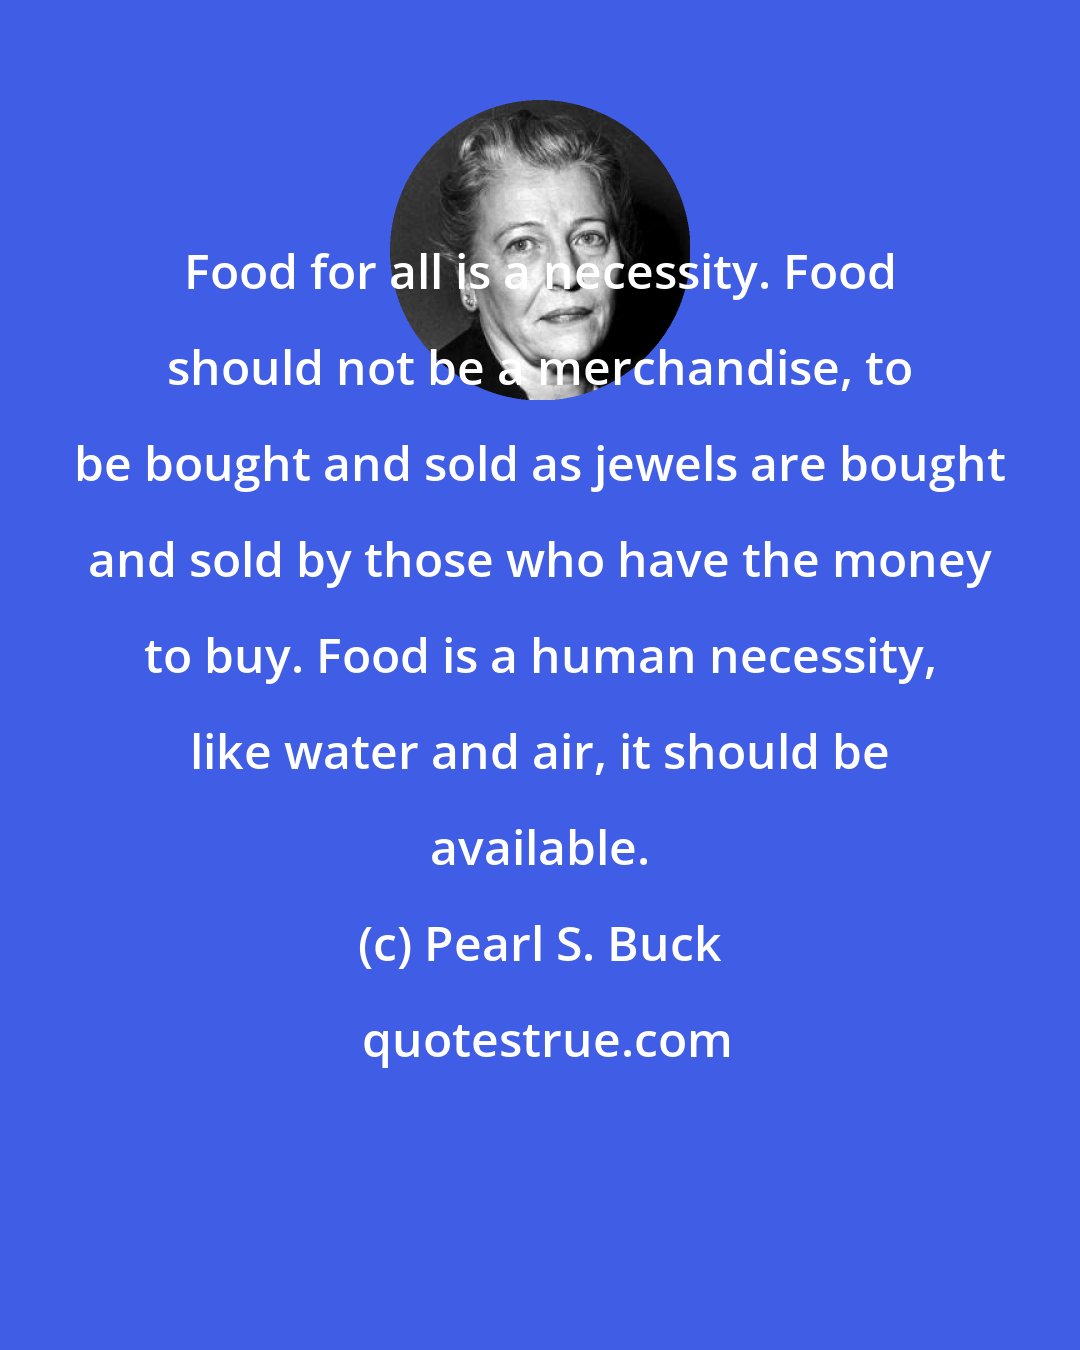 Pearl S. Buck: Food for all is a necessity. Food should not be a merchandise, to be bought and sold as jewels are bought and sold by those who have the money to buy. Food is a human necessity, like water and air, it should be available.